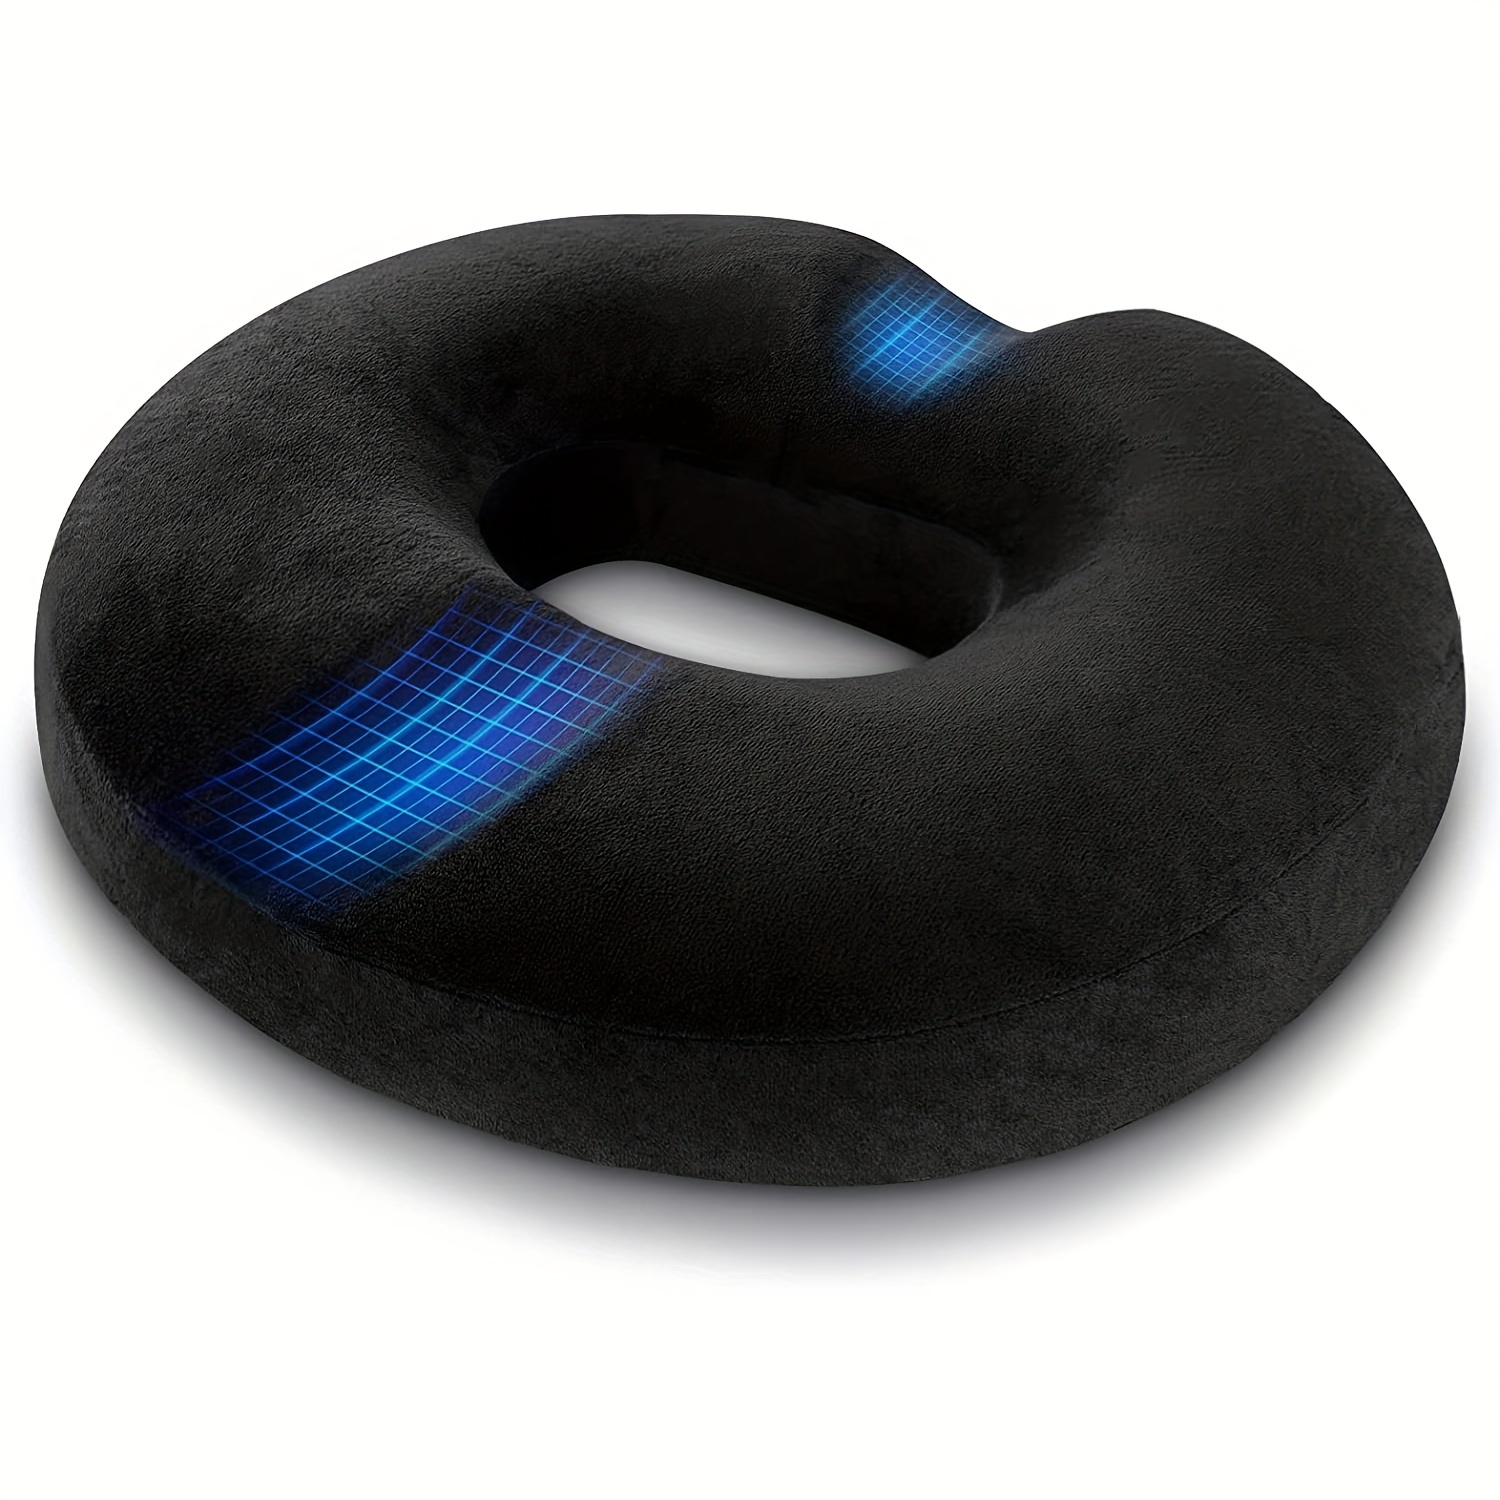 Relieve Pain & Pressure Instantly: Donut Pillow, Tailbone Pain Relief  Cushion, Wheelchair Cushions & More!